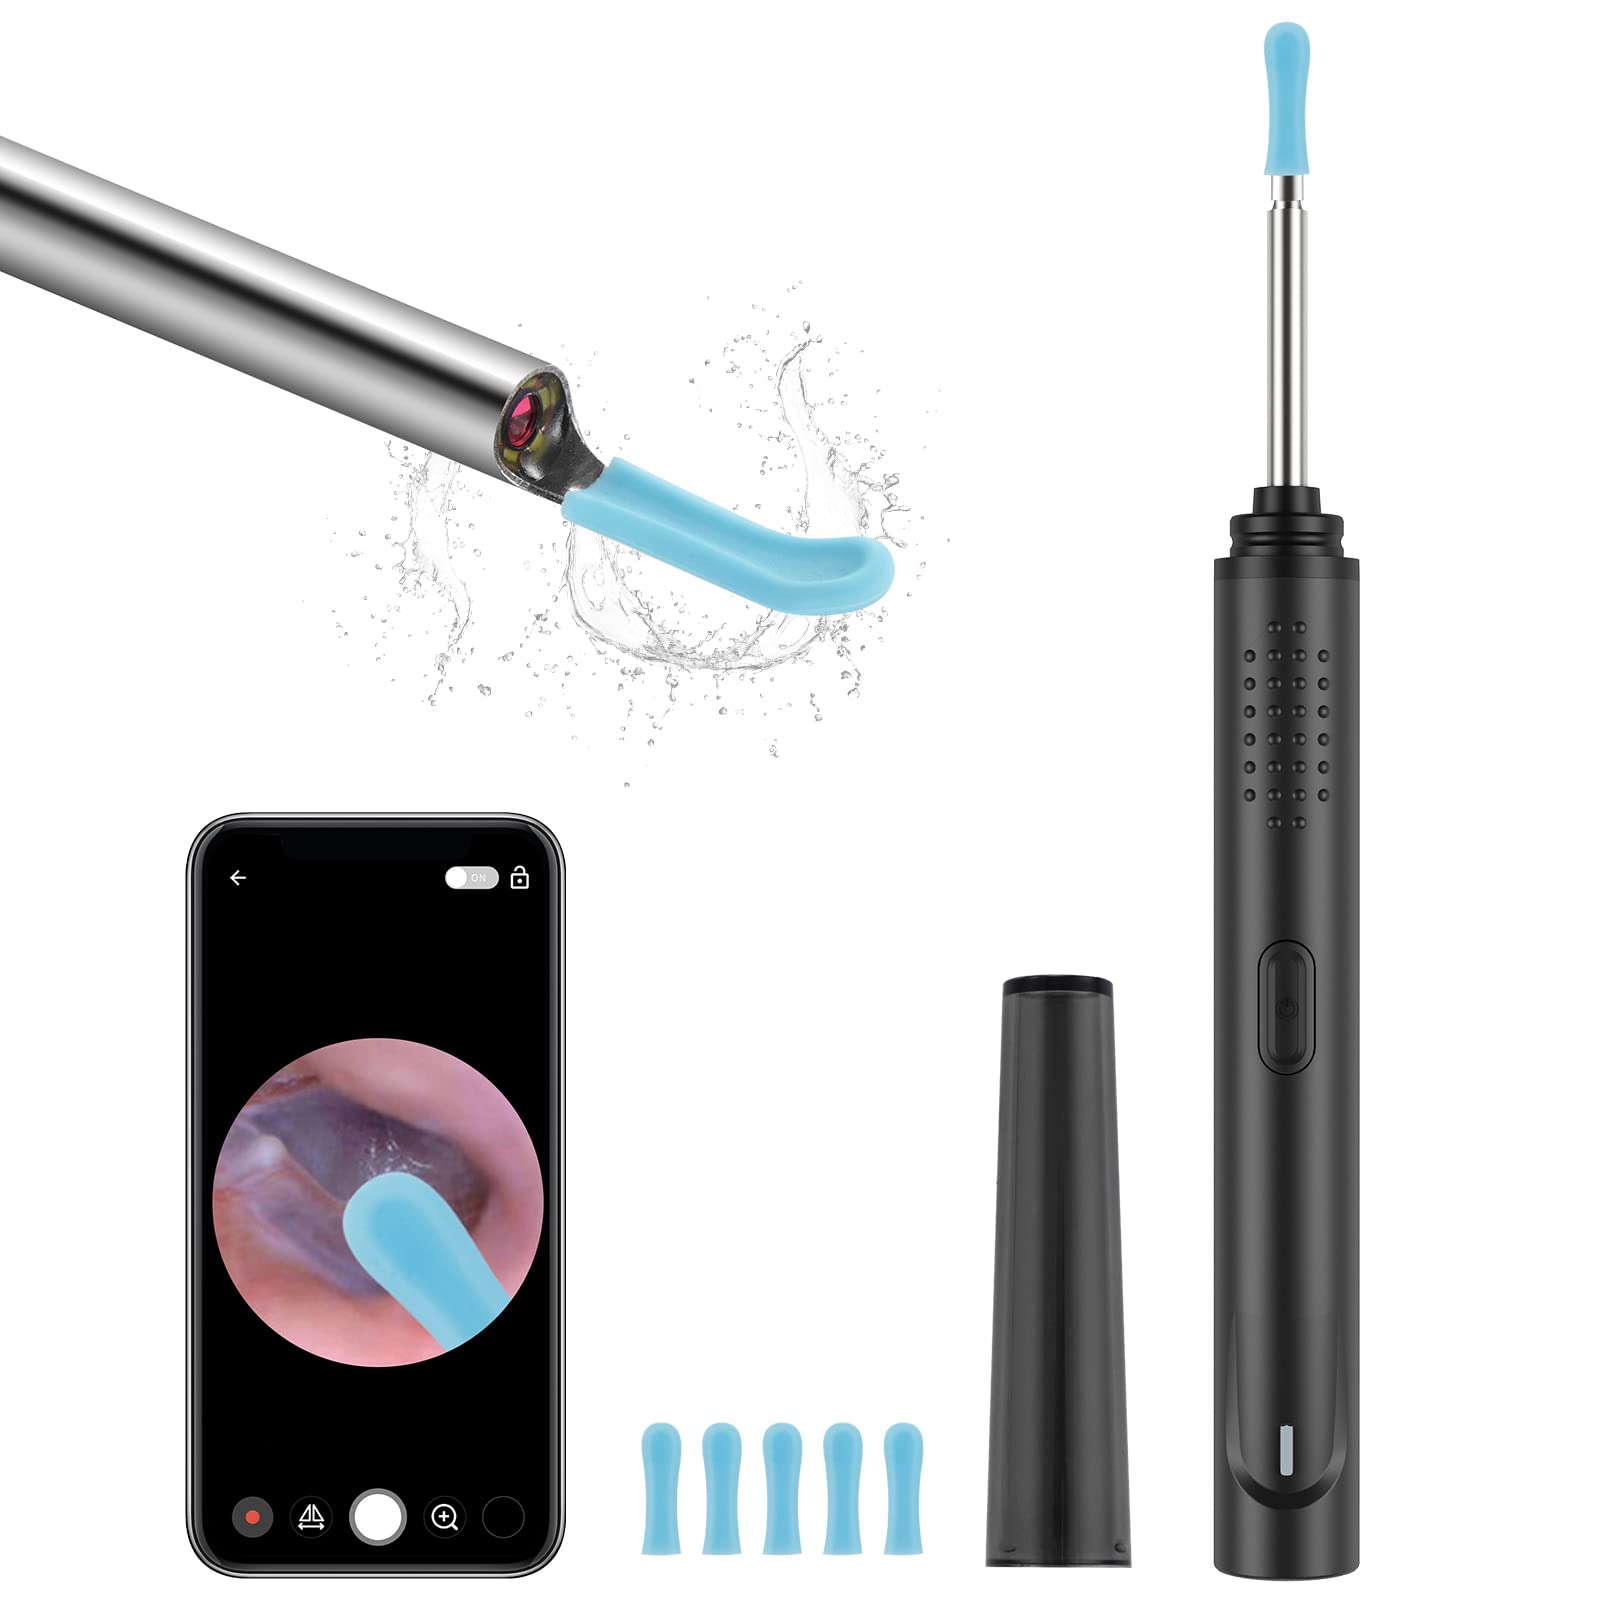 LESIBO Ear Wax Removal Kit with Camera,Ear Cleaning Kit for iPhone,Ear Cleaner Earwax Removal Kit,Ear Scope Otoscope with Light,Earwax Removal Tools for Adults and Baby,Earwax Remover Ear Pick System…